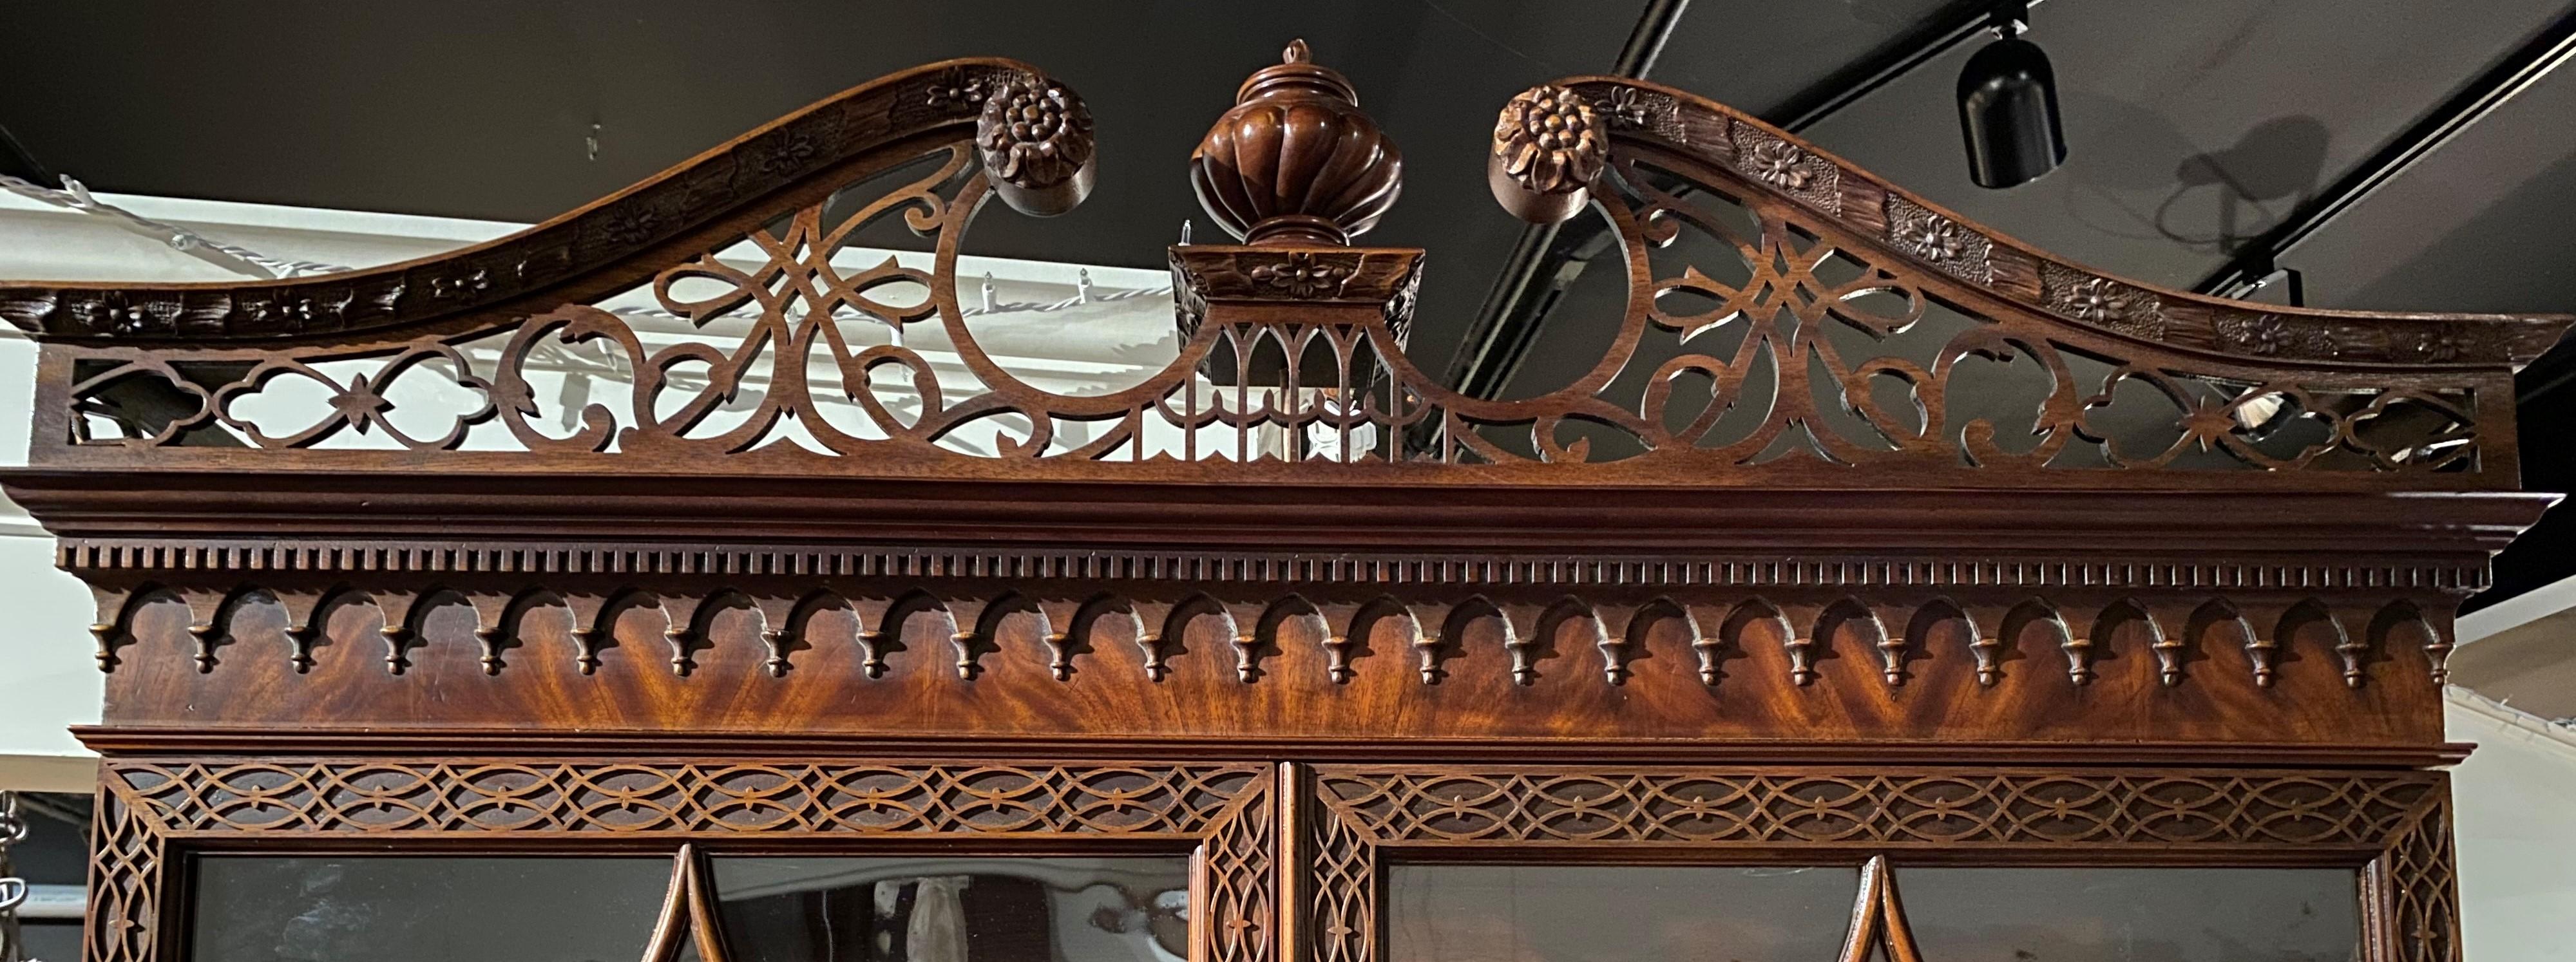 A fine Chinese Chippendale style two-piece mahogany lighted display cabinet with fitted butler’s desk by John Widdicomb Co, Grand Rapids, Michigan, featuring a beautifully carved reticulated split pediment with a center elevated urn form finial